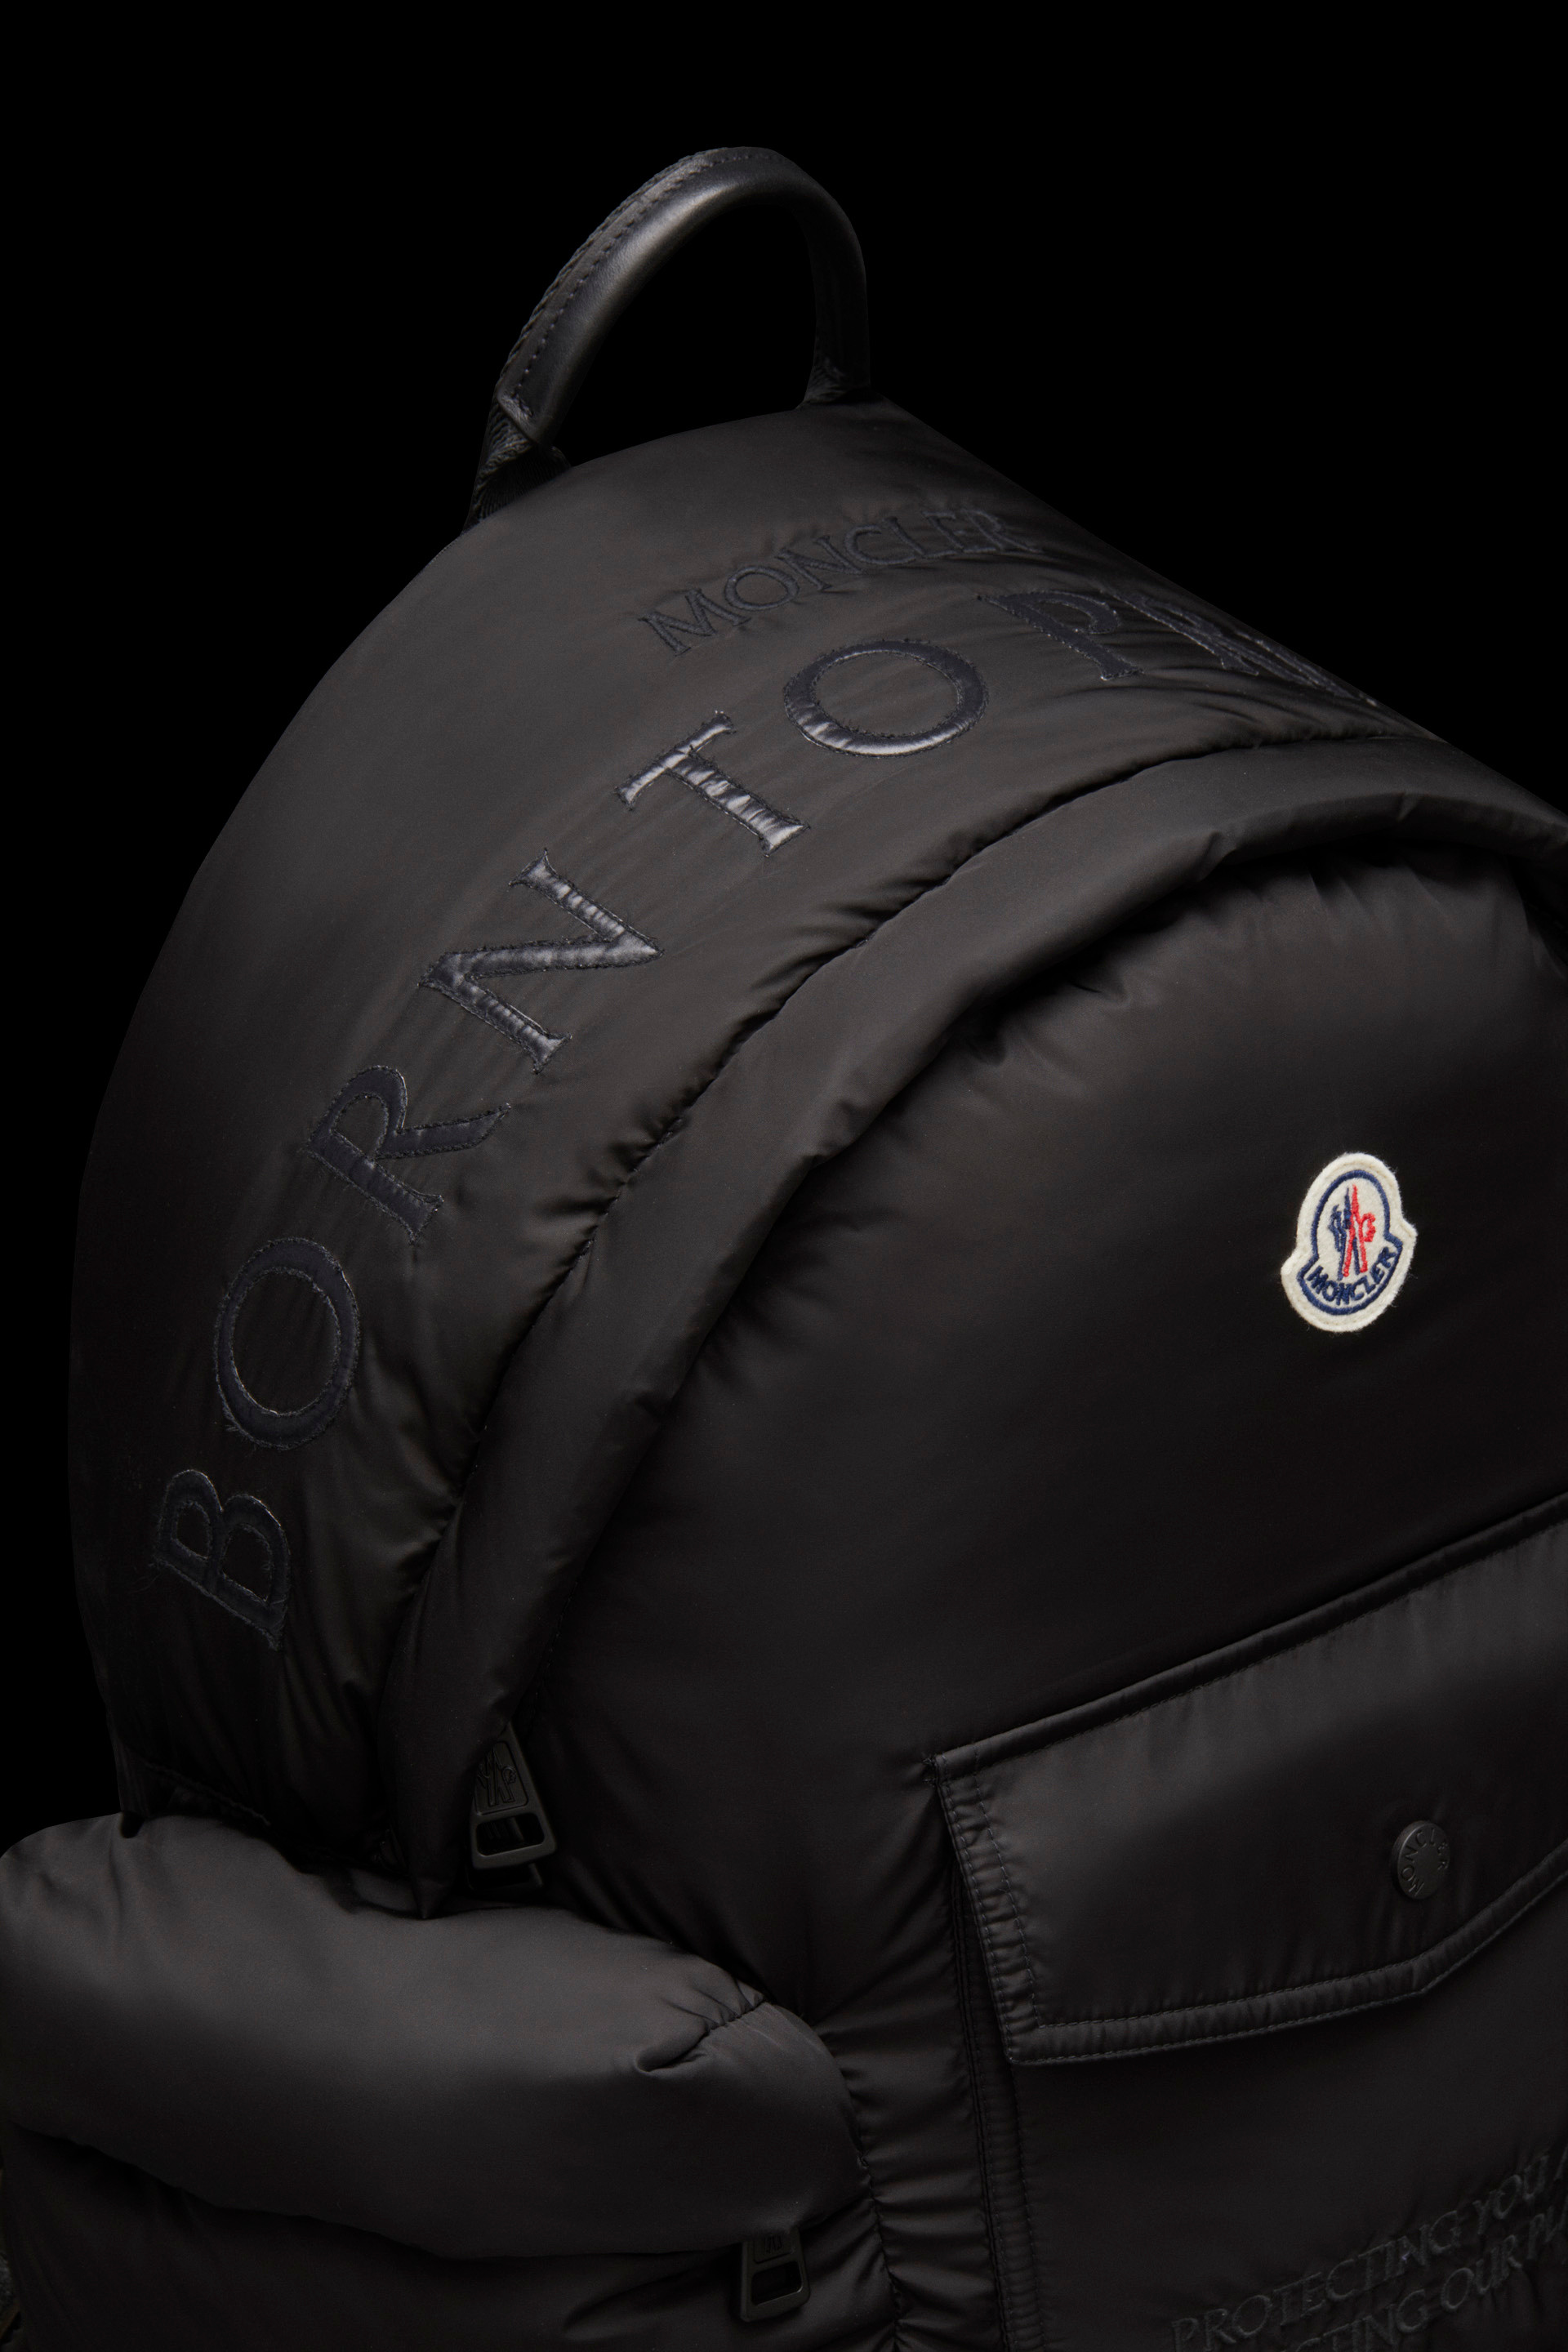 Moncler - Born To Protect | Moncler US